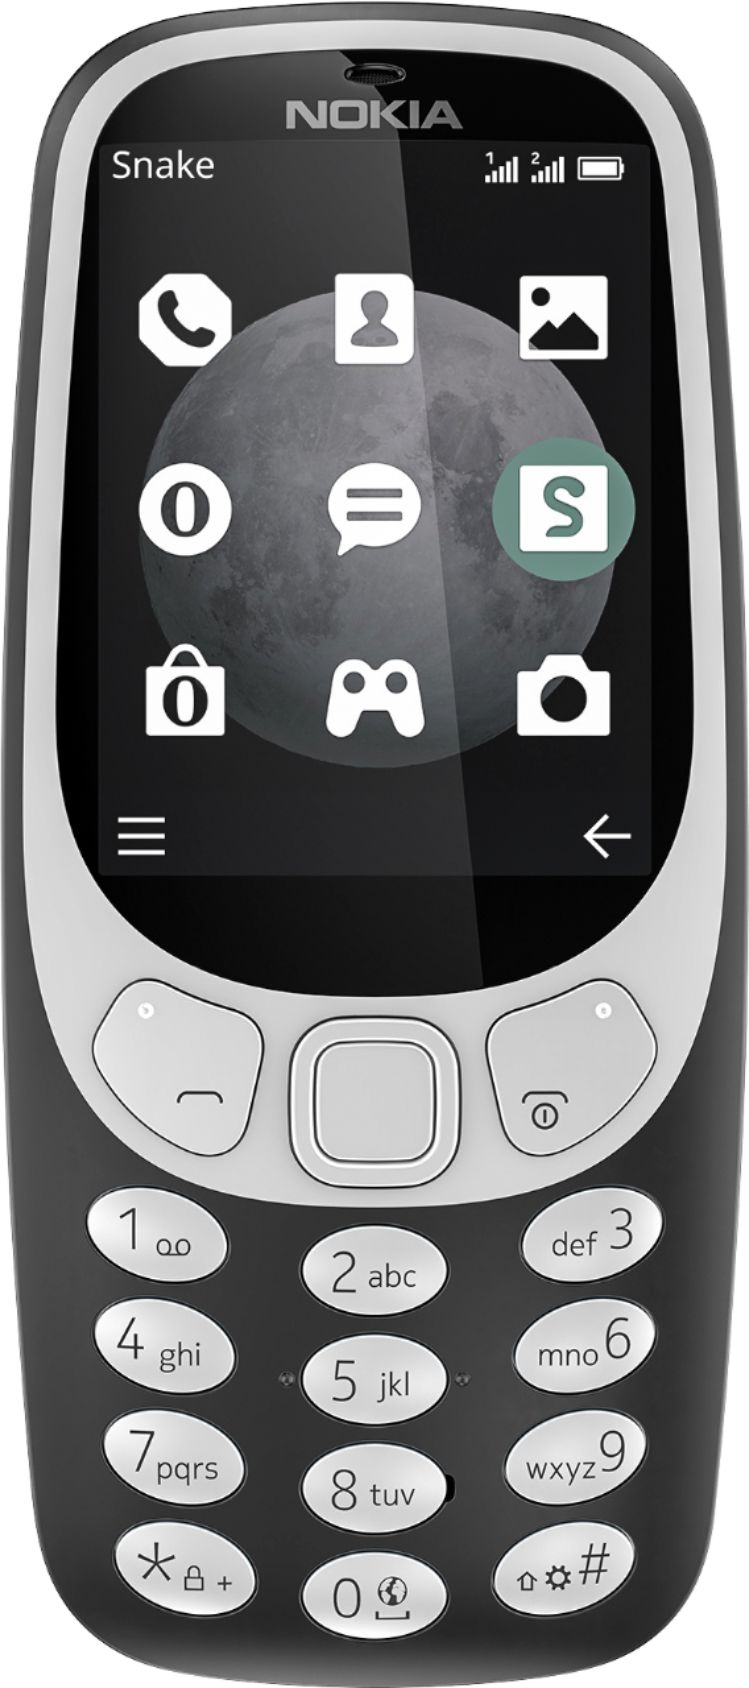 Classic Nokia 3310 Old Blue - Unlocked - Any Network - Any Country - SNAKE  GAME!